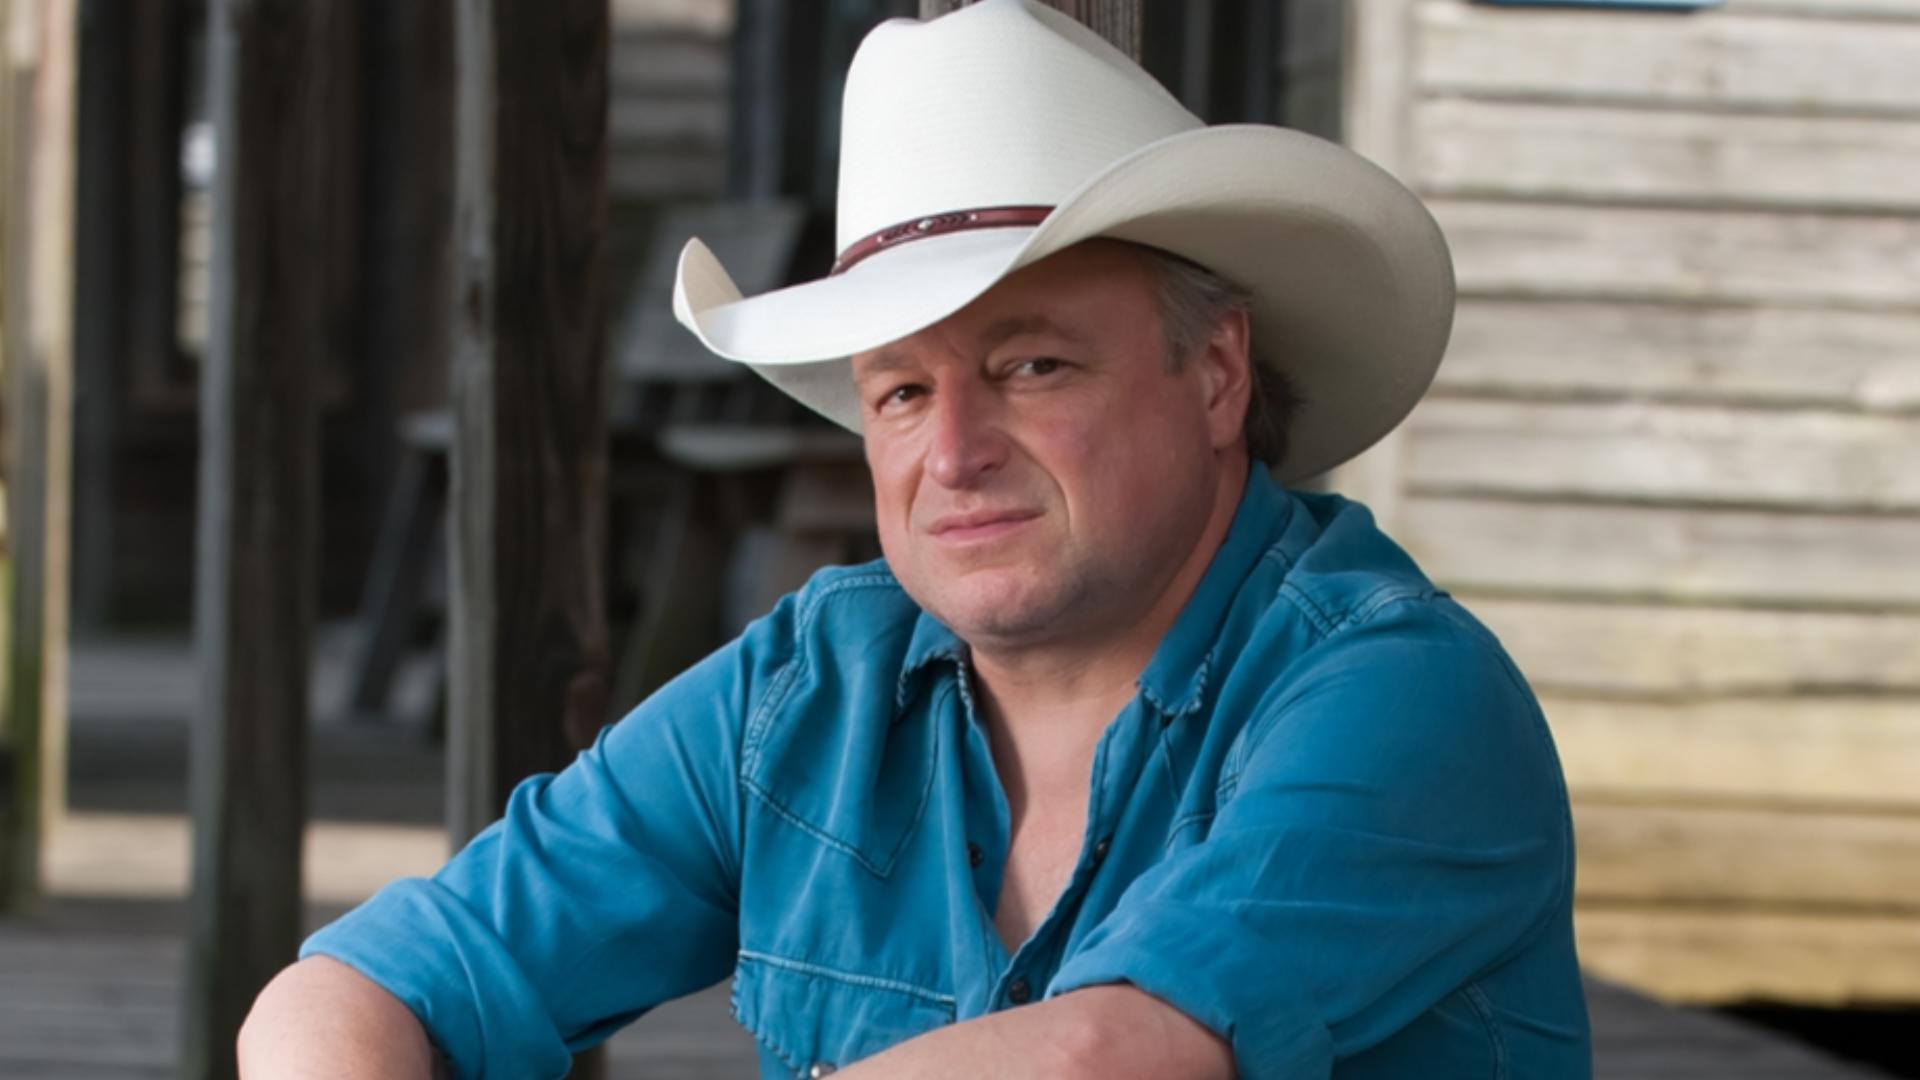 Country music legend and Beaumont native, Mark Chesnutt, suffered a major health scare over the weekend according to the singer's official Facebook page.